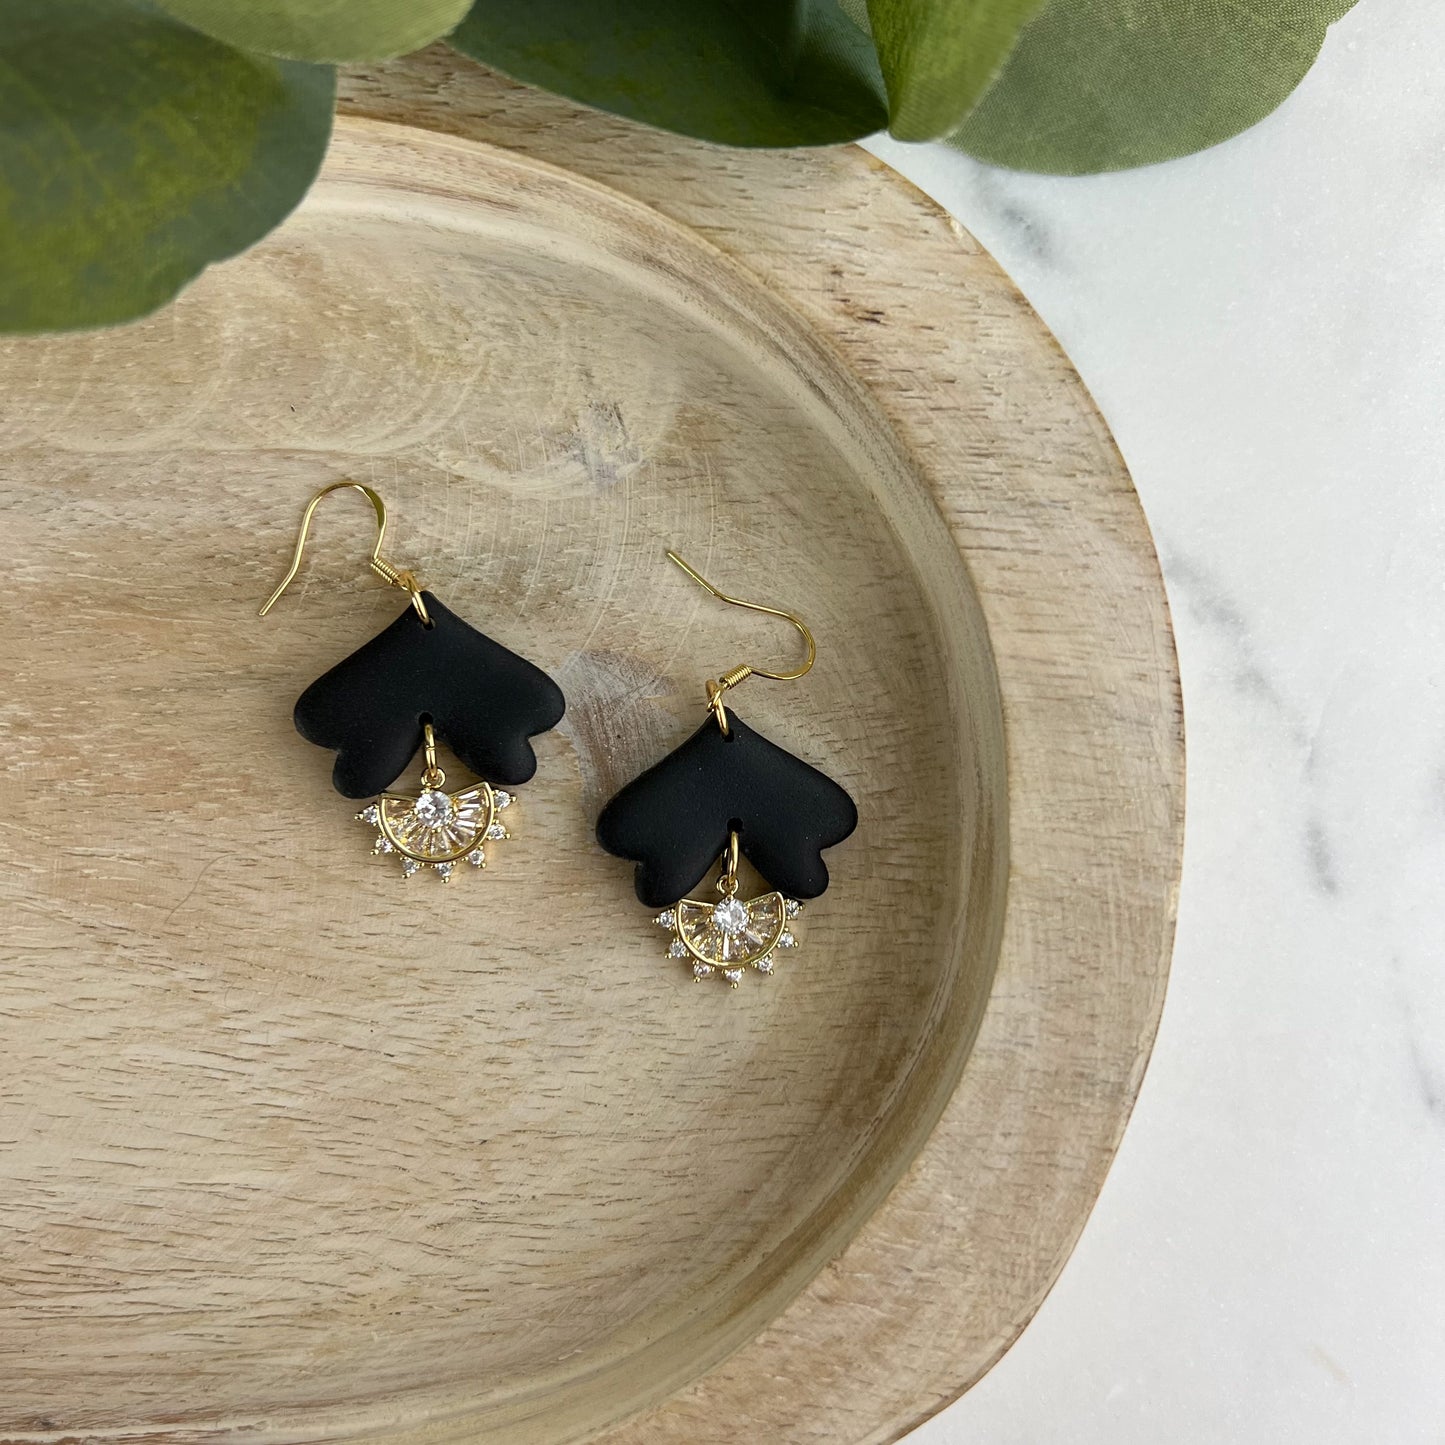 Basic black and gold polymer clay and Cz earrings